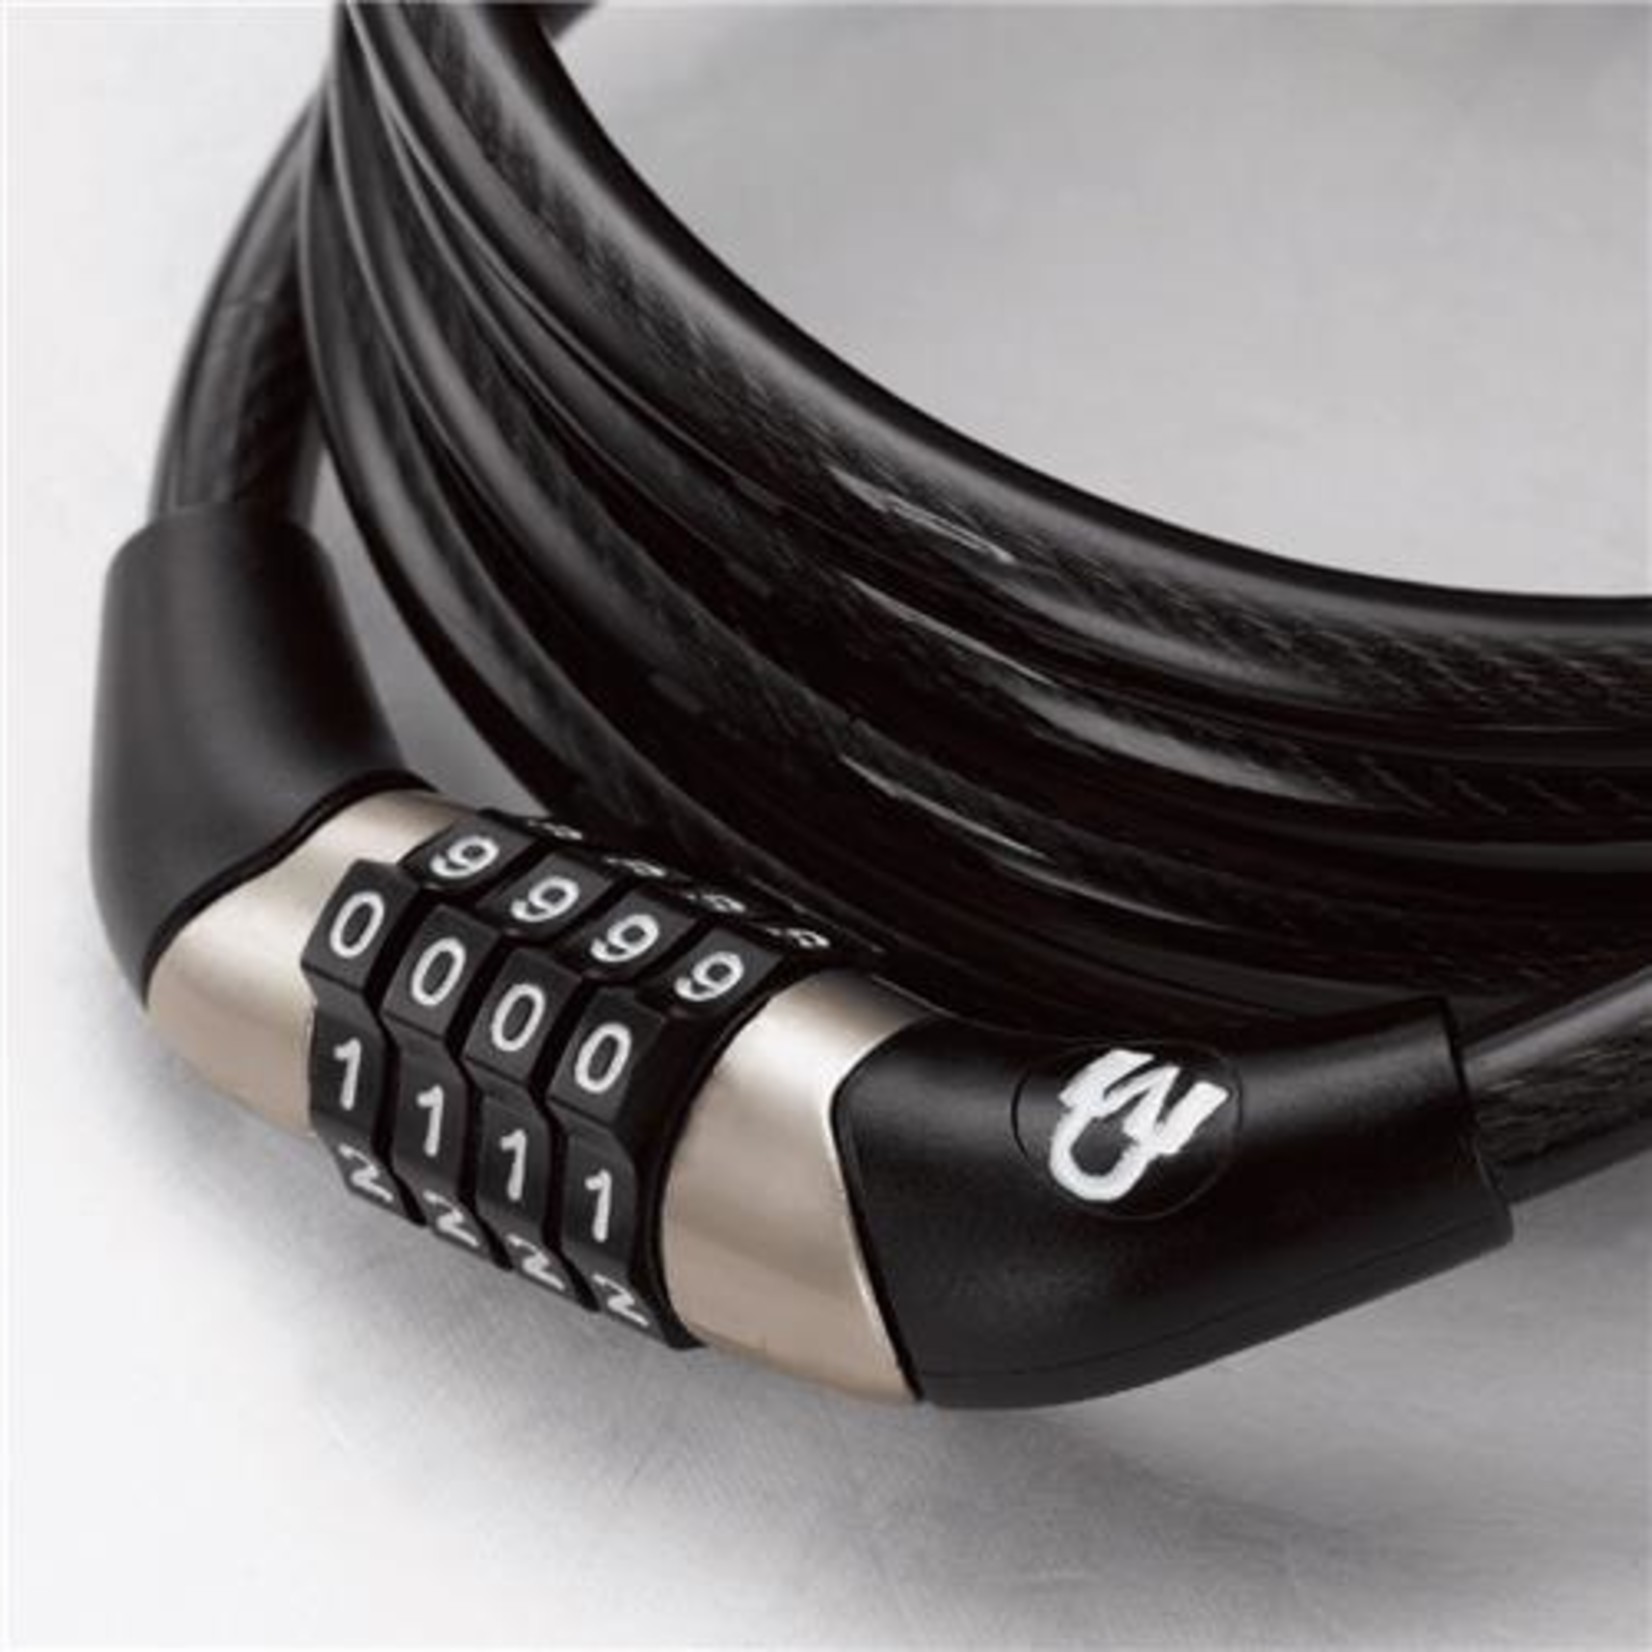 Onguard Onguard Bike Lock - OG Series - Coiled Cable Lock Combo - 150cm x 8mm